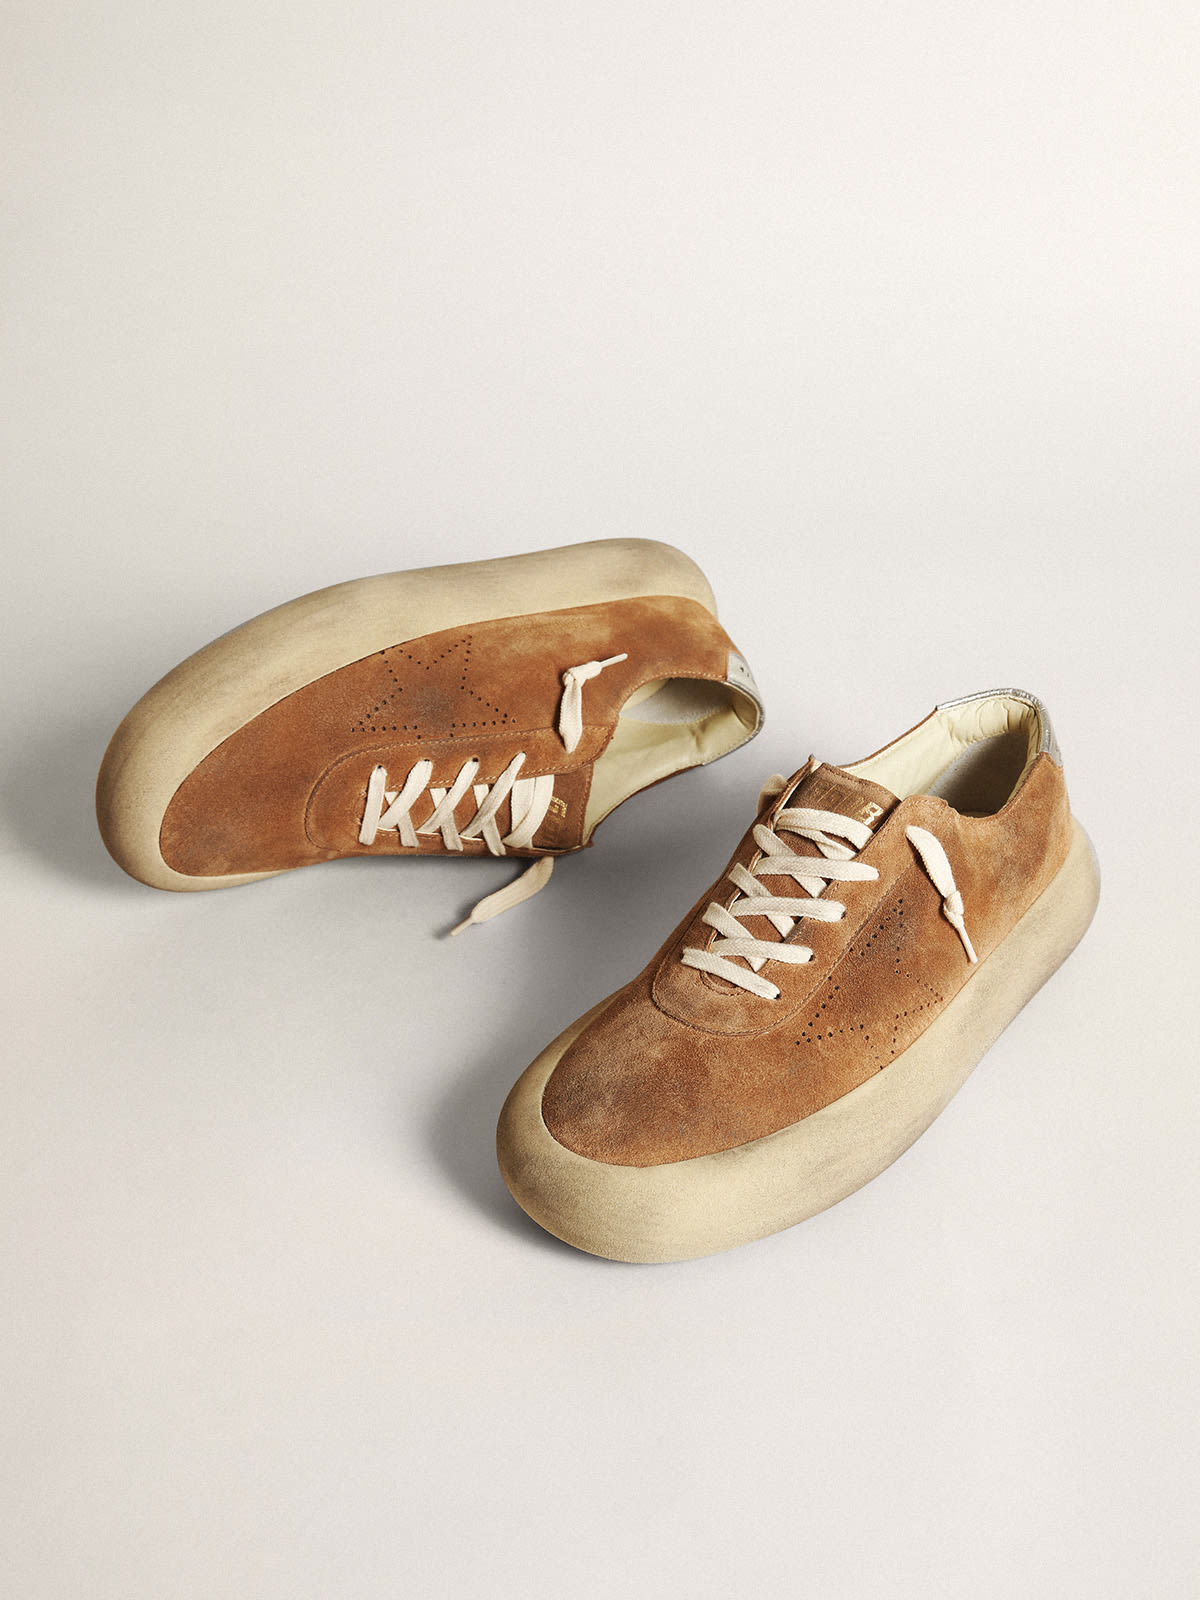 Golden Goose - Men's Space-Star in tobacco-colored suede with perforated star in 